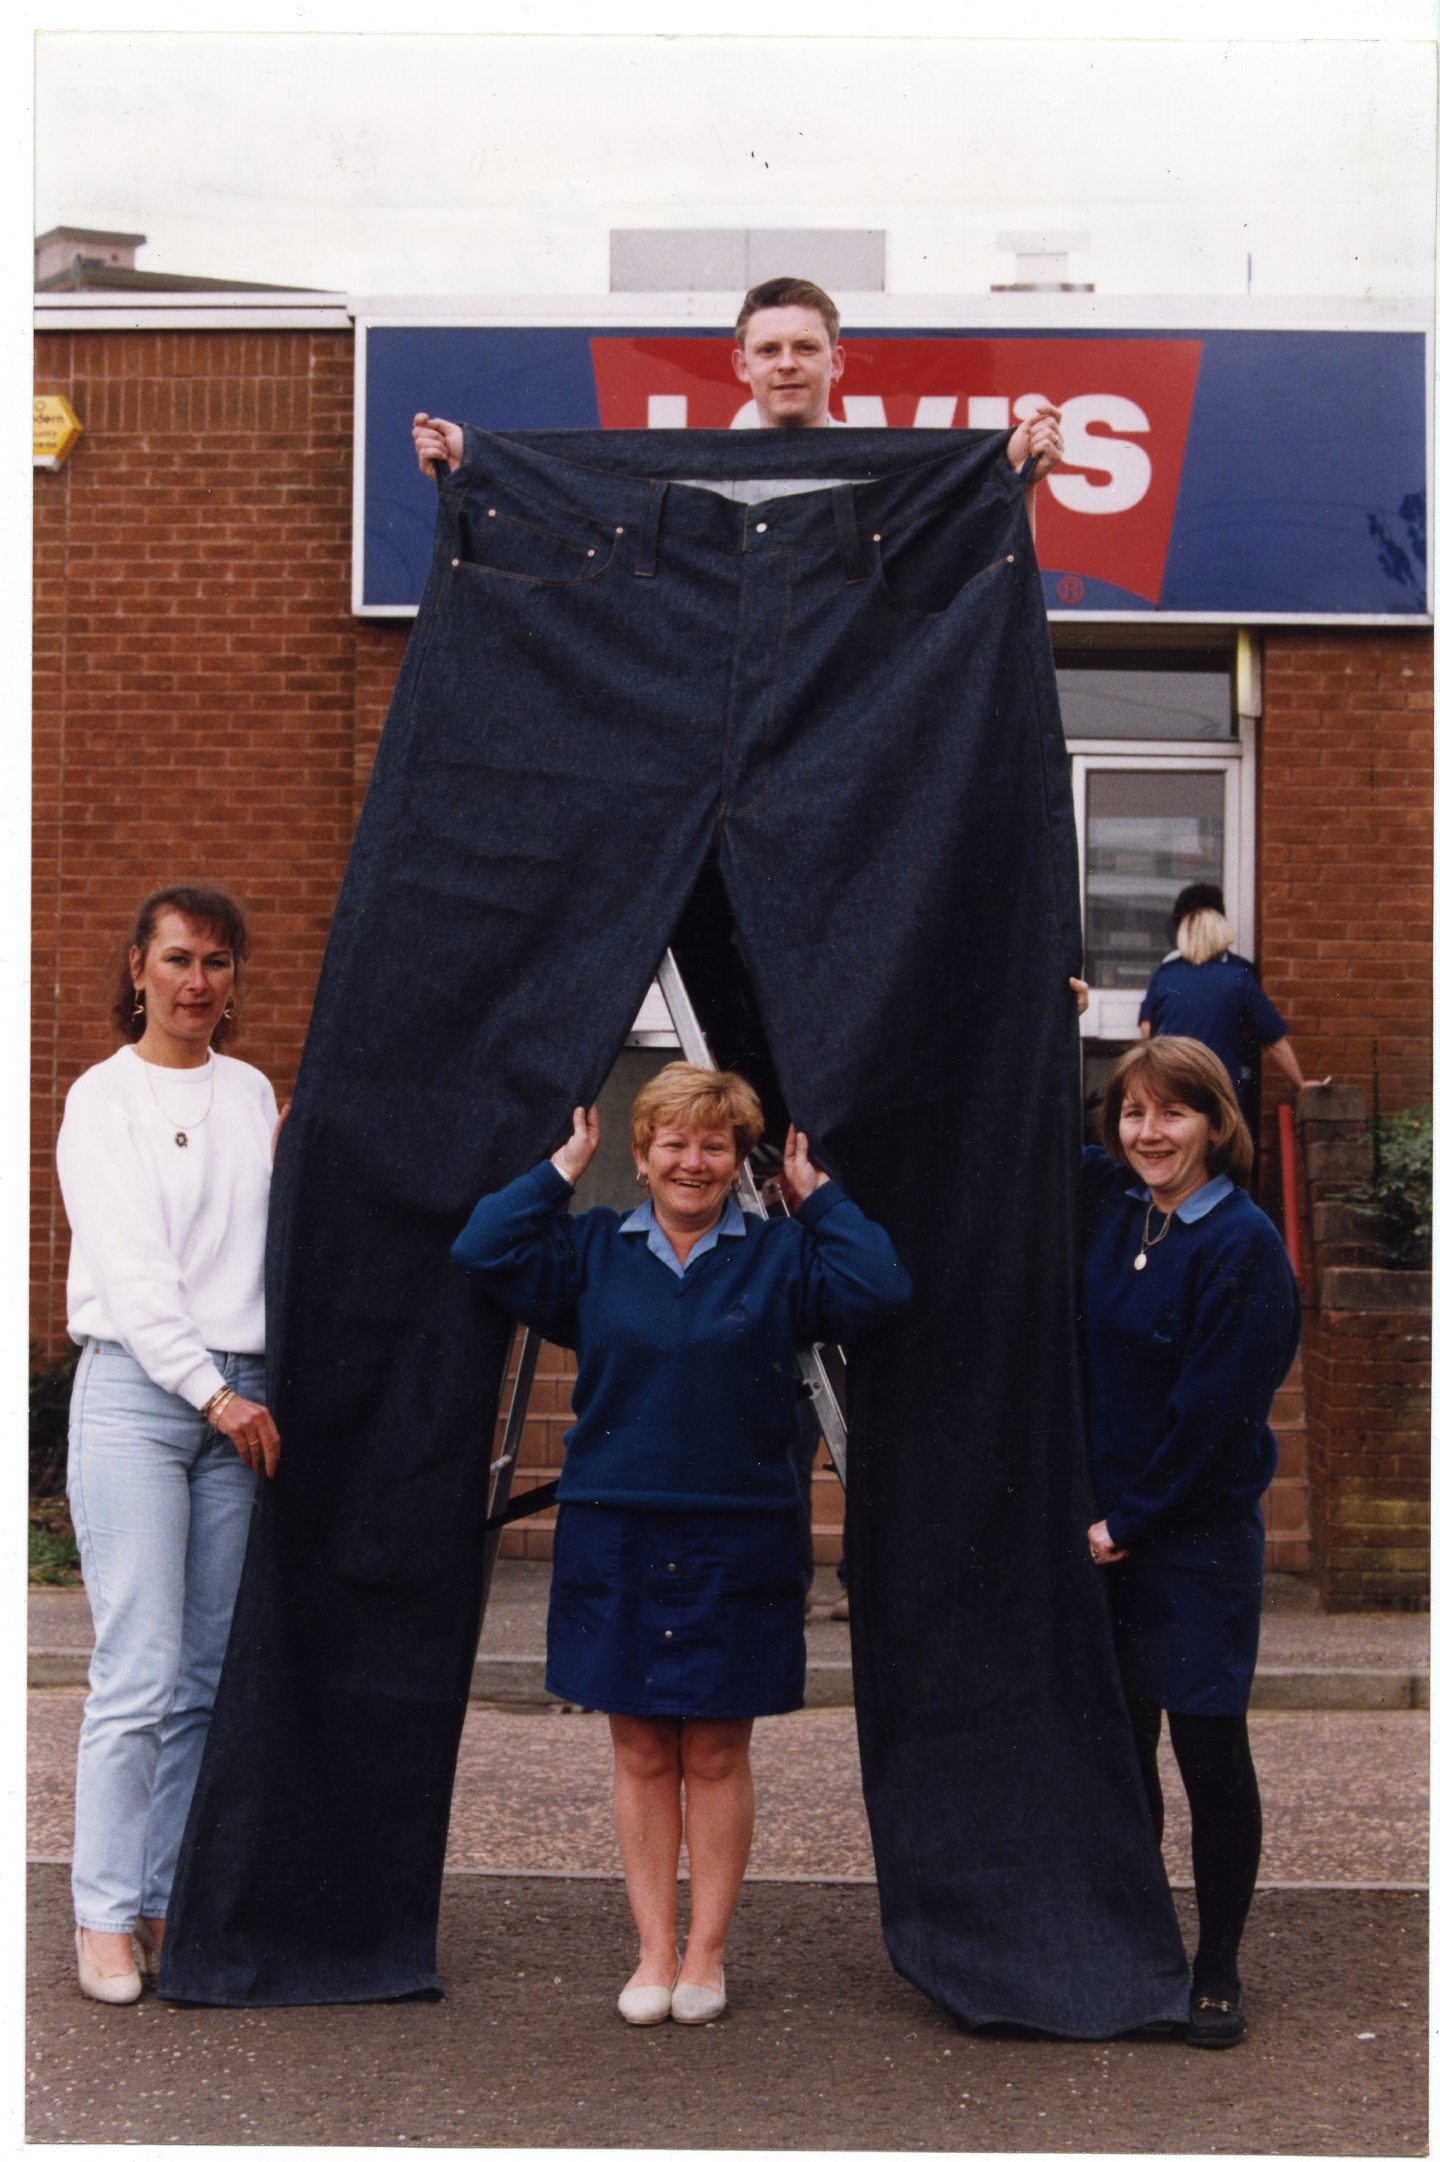 Dundee Levi's workers outside the site with a giant pair of jeans